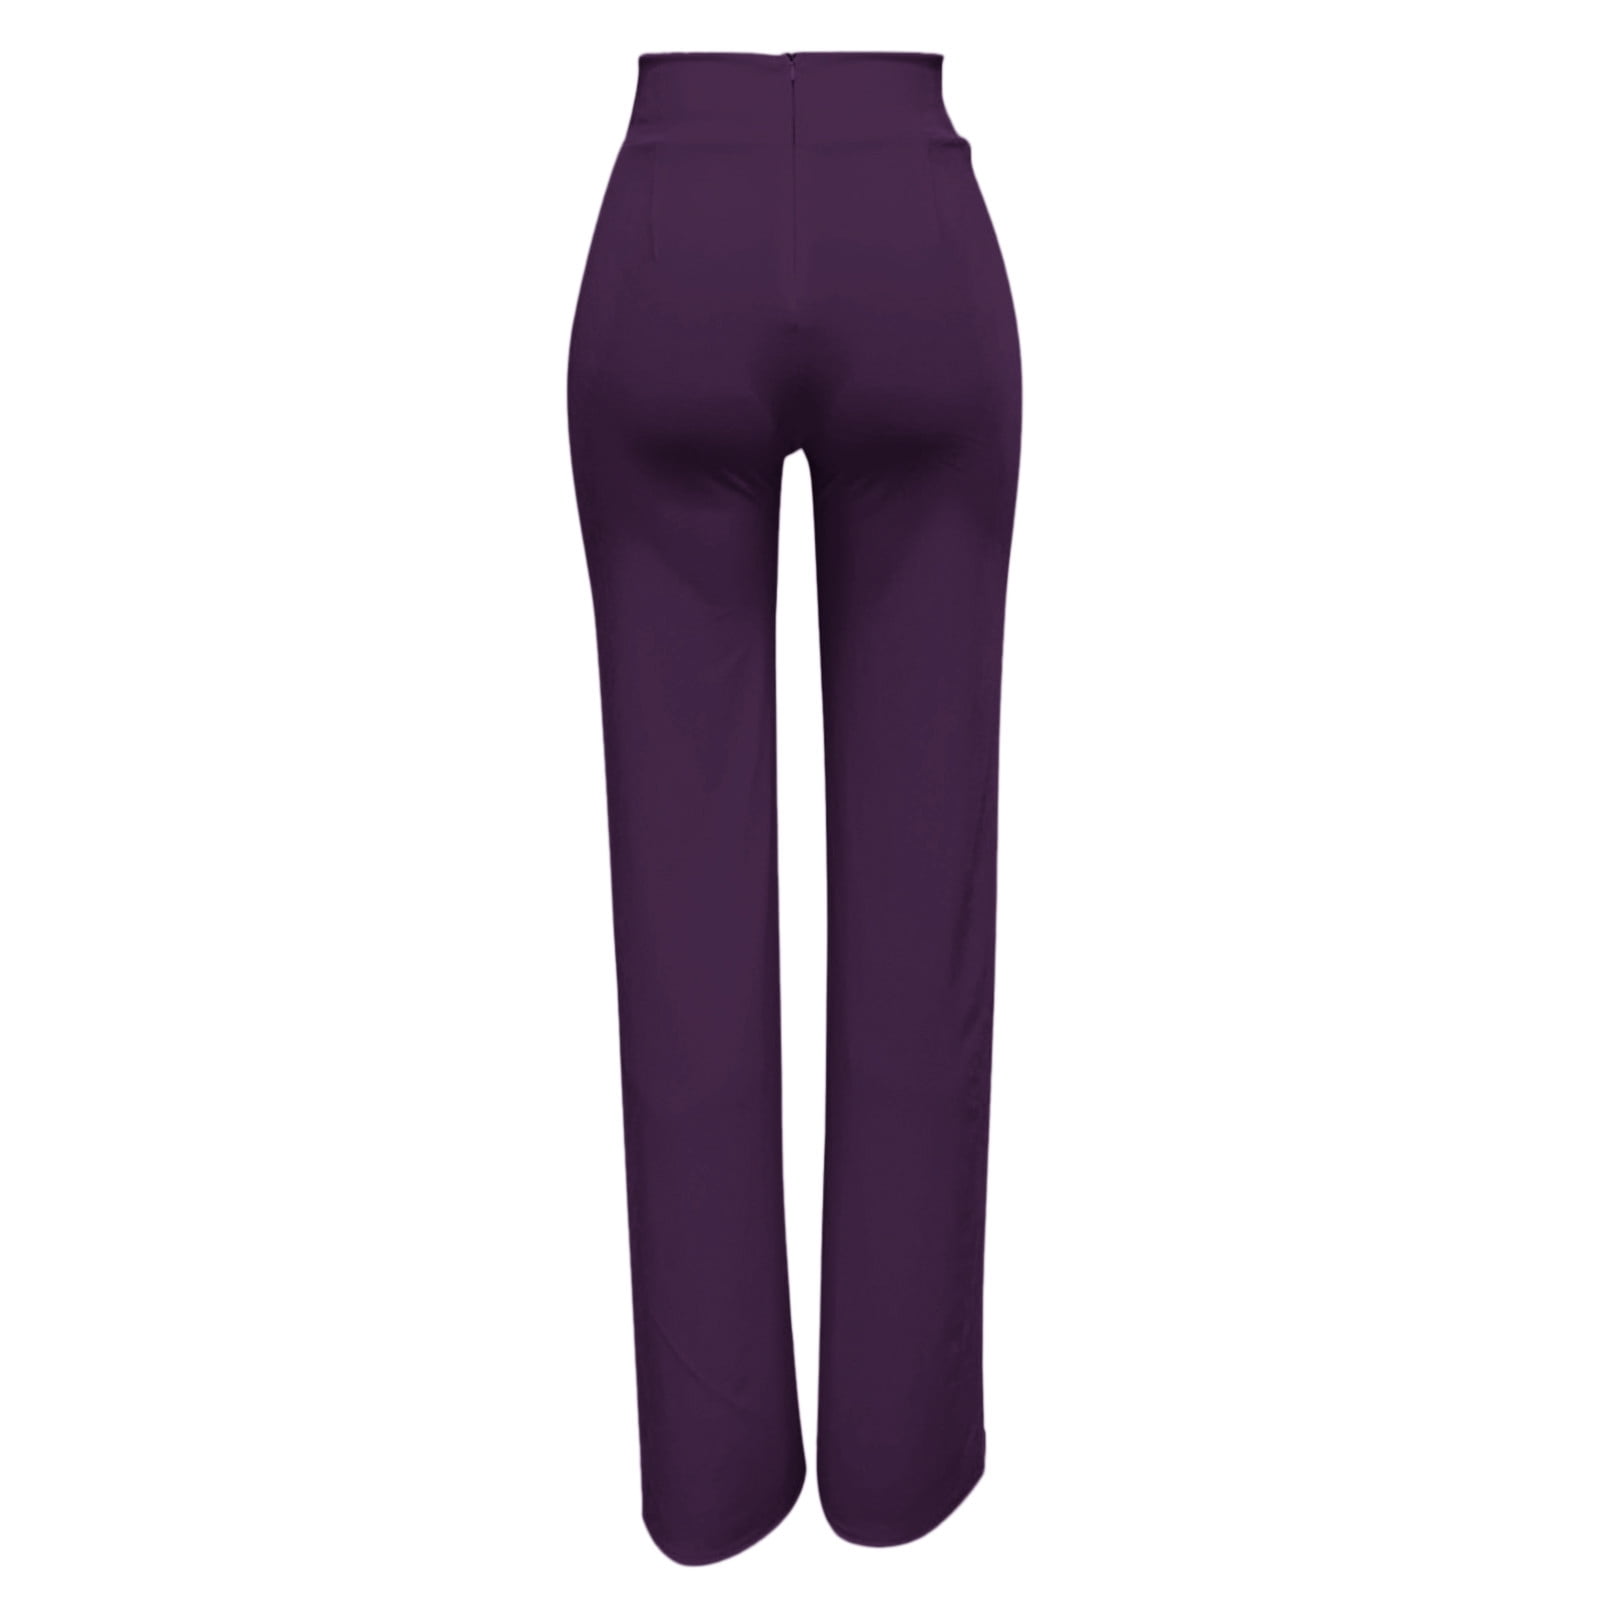 FANCY STRETCHABLE WOMEN TRACK PANT 108